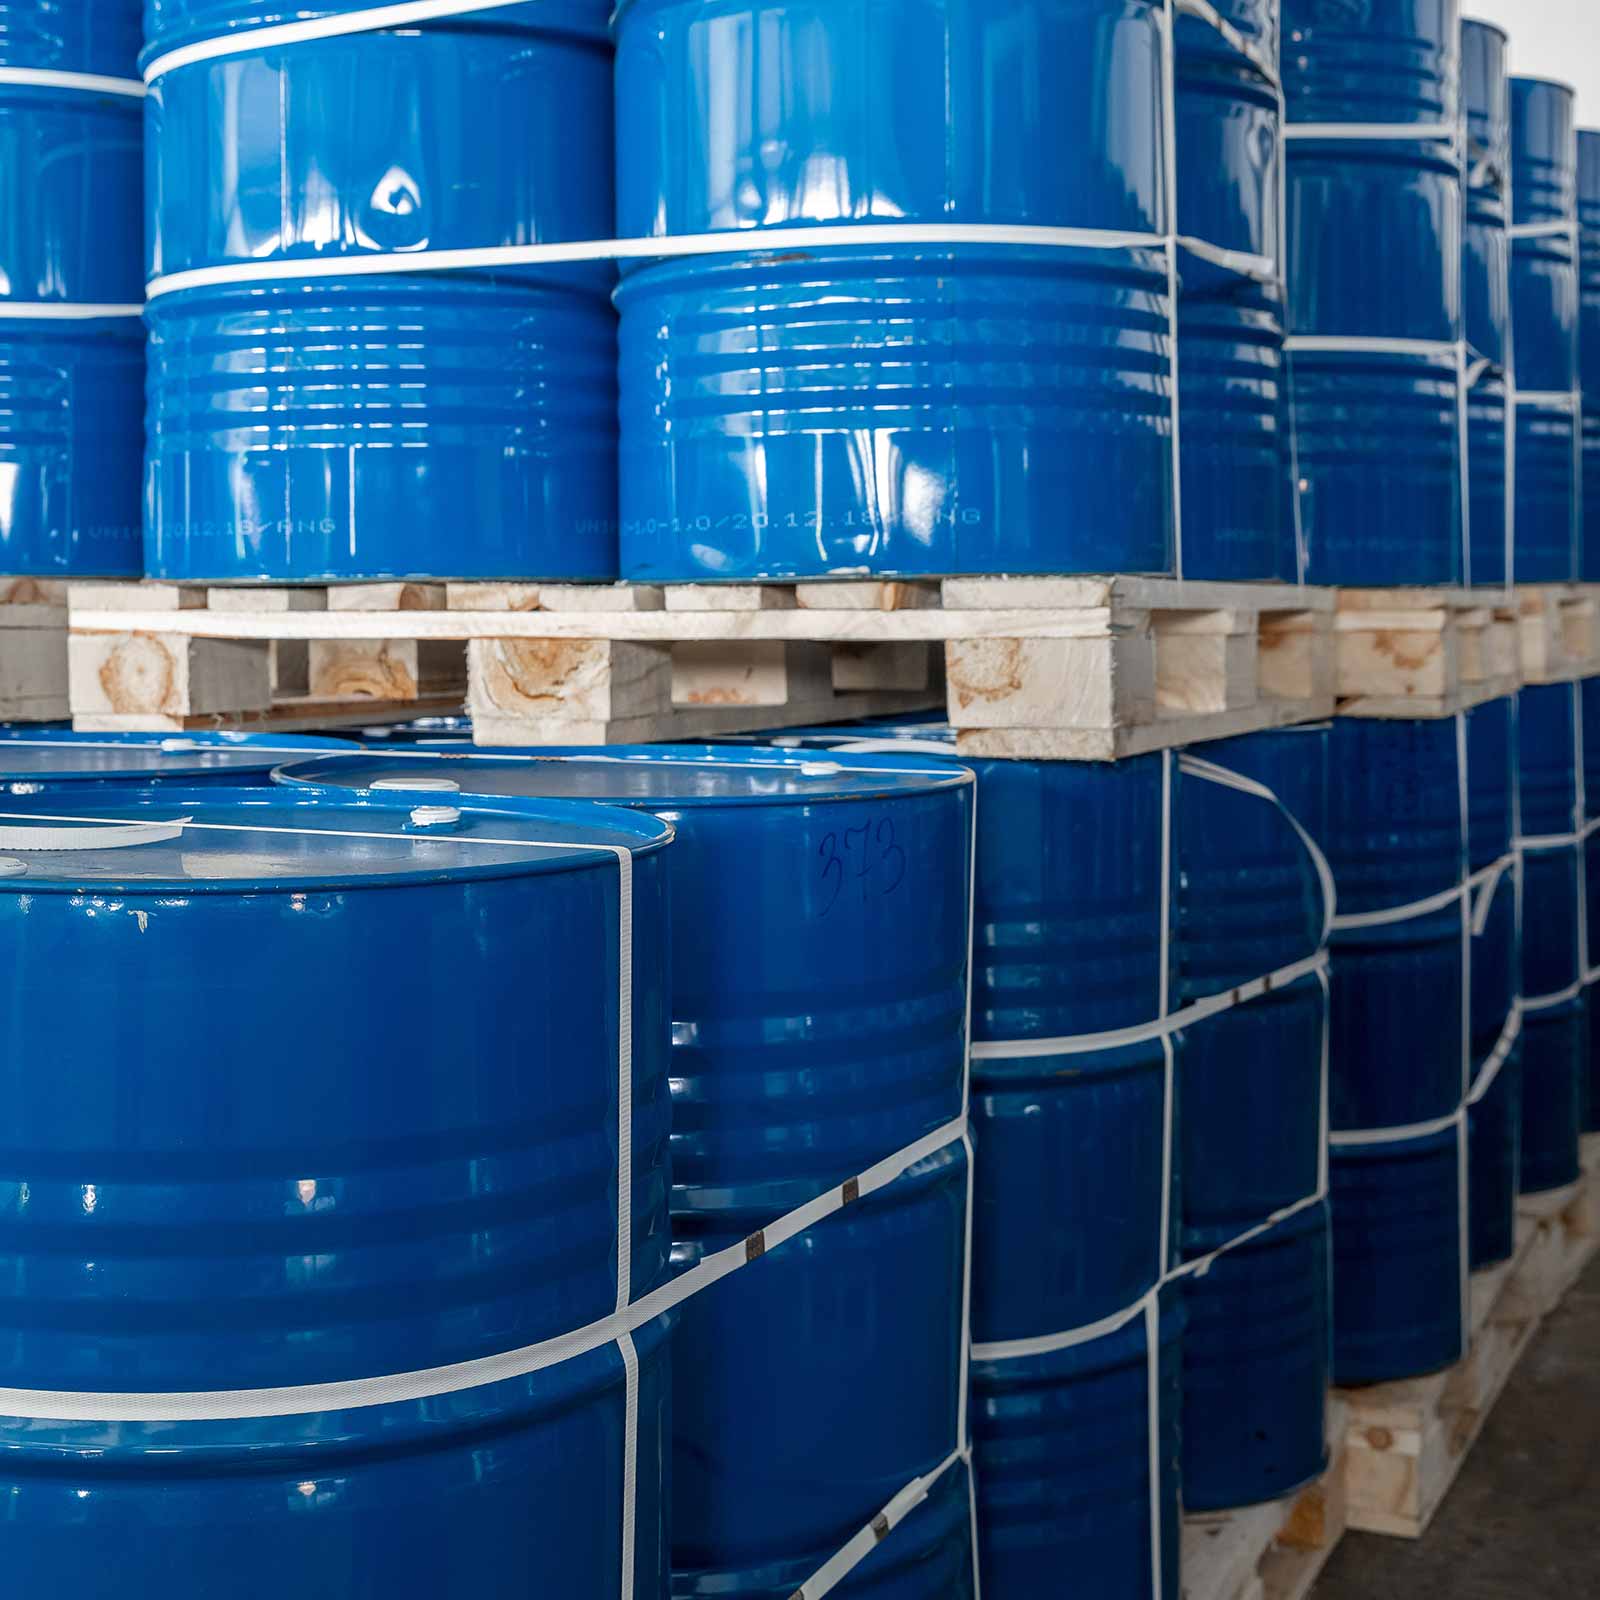 Barrels in a chemical manufacturing facility